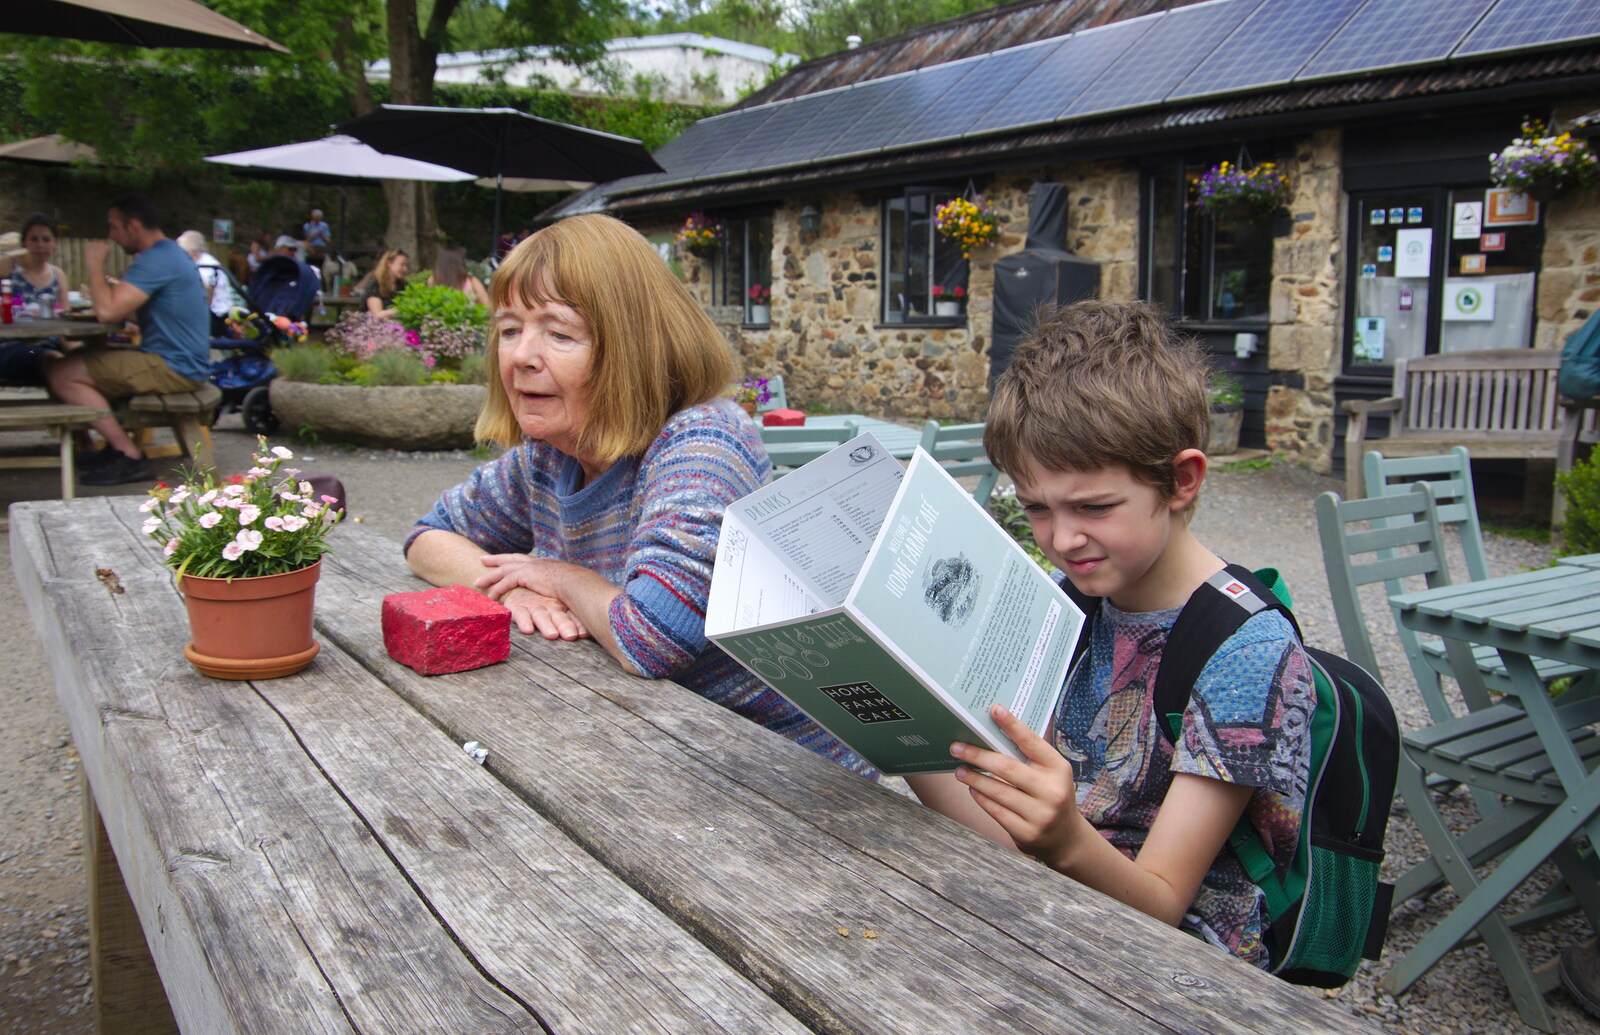 Fred looks at the menu suspiciously from Chagford Lido and a Trip to Parke, Bovey Tracey, Devon - 25th May 2019